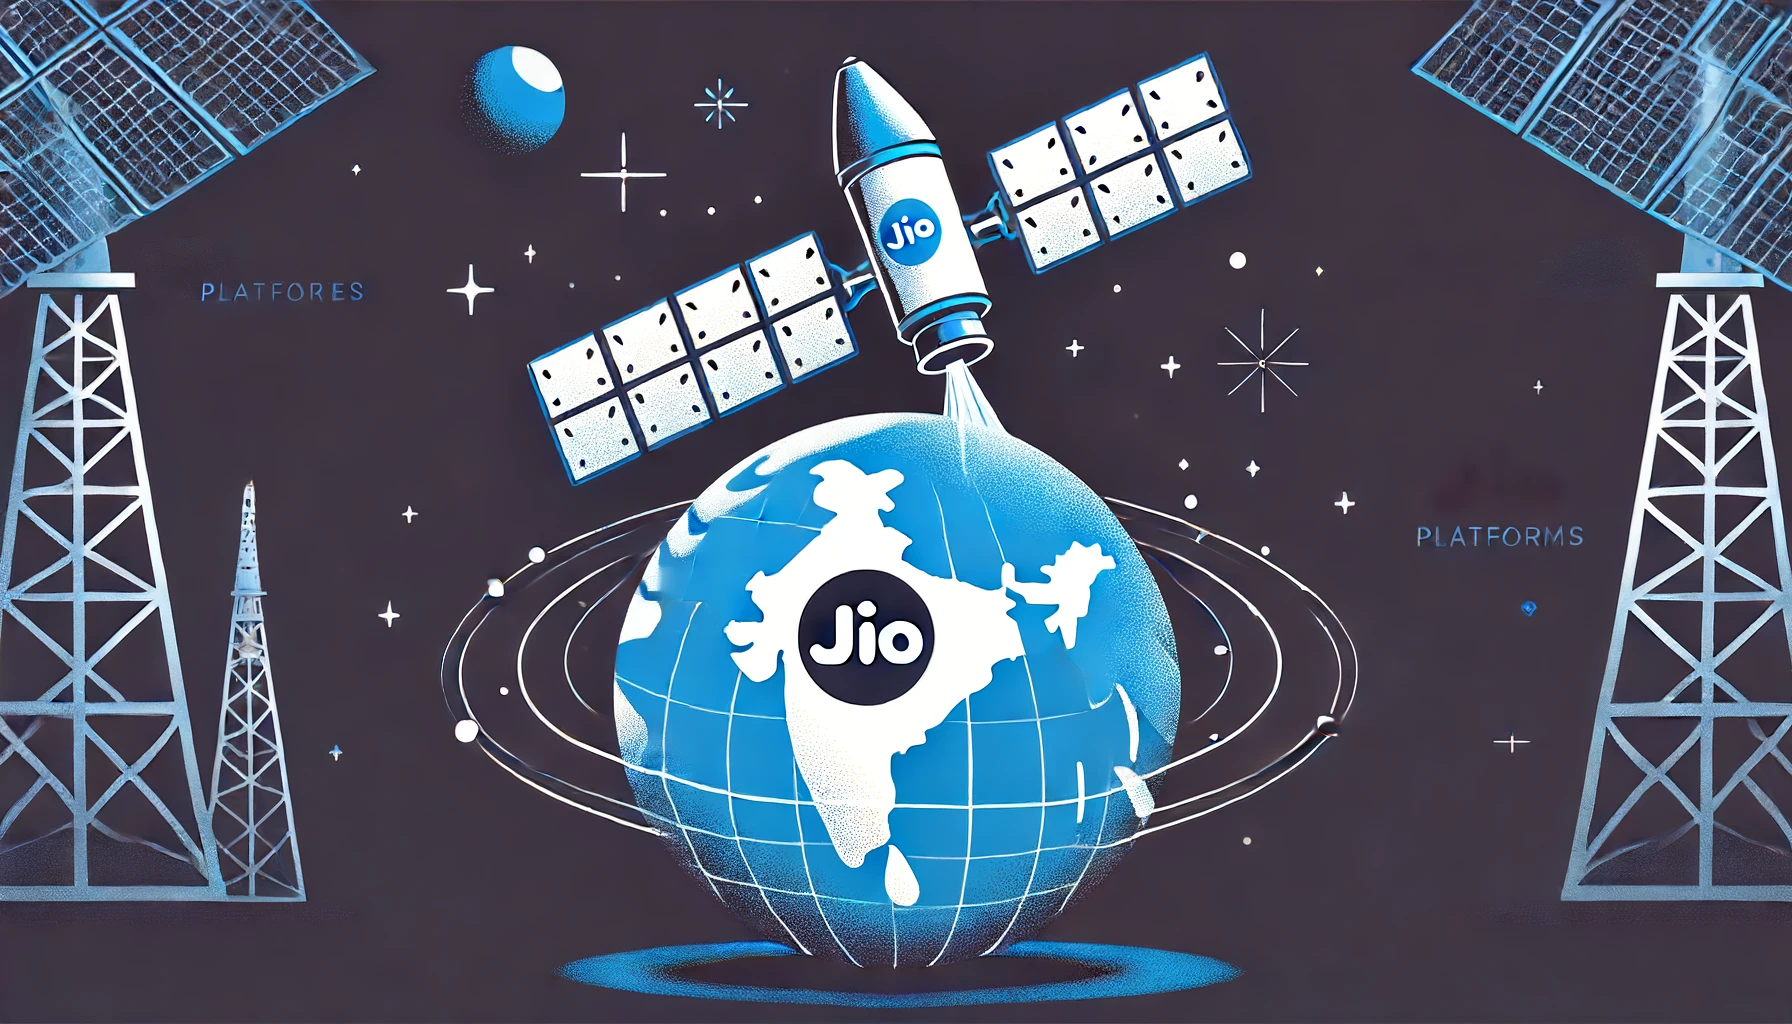 India's Jio Platforms Secures License to Launch Satellites Competing with Starlink